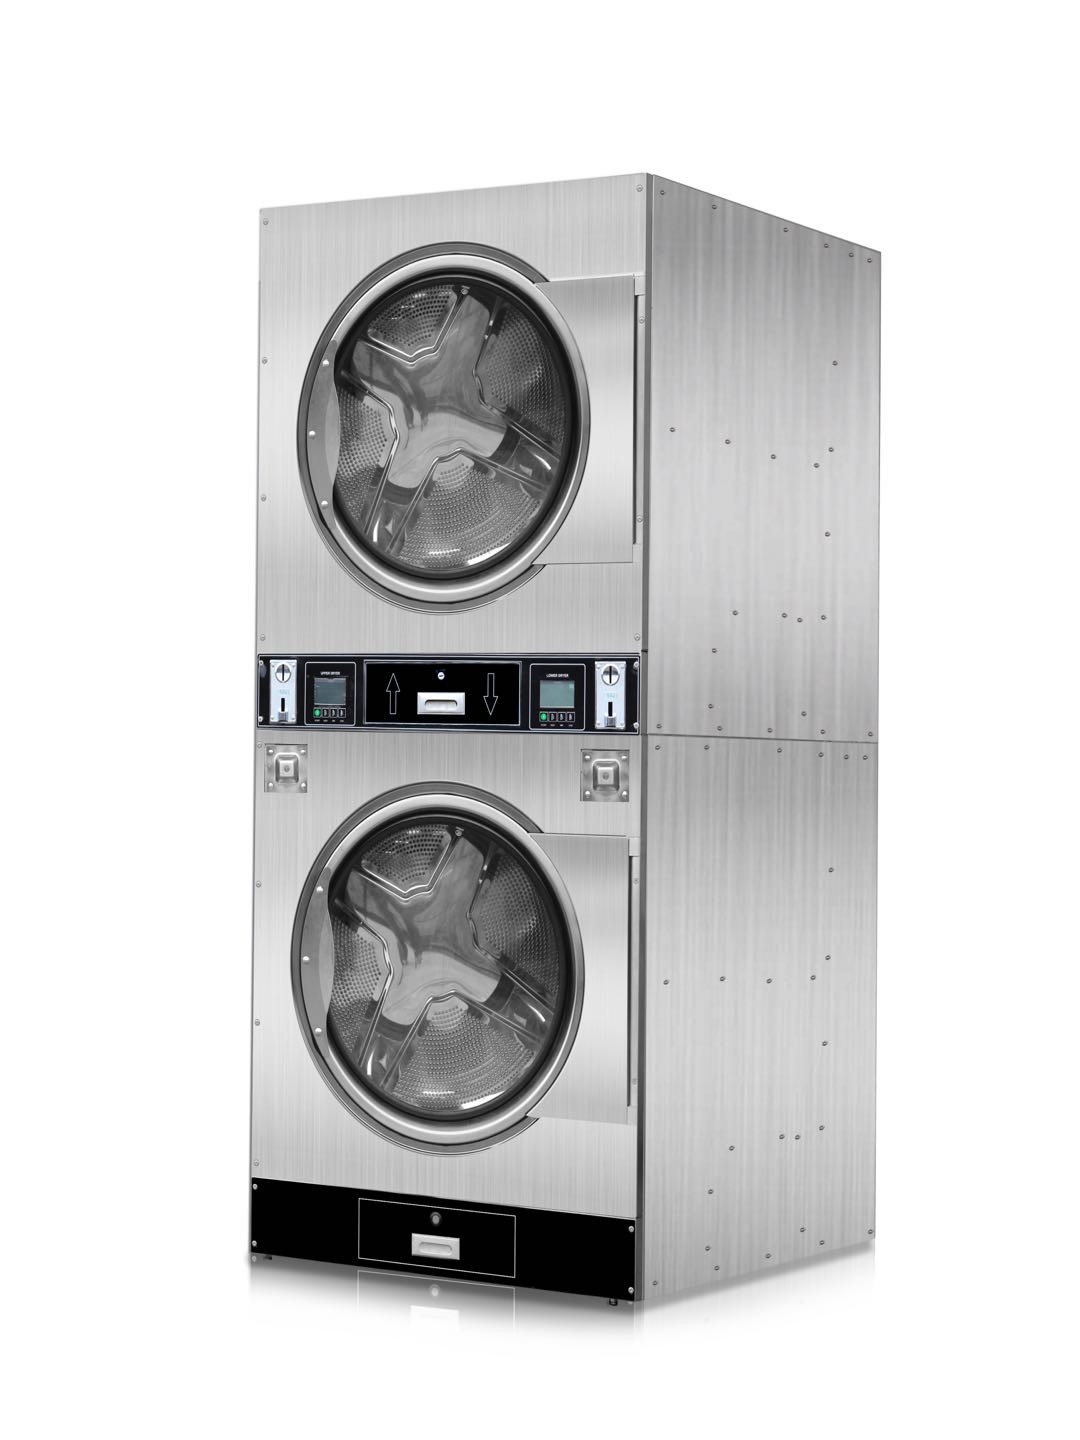 8kg 10kg 12kg Speed queen washing machine, coin washer and dryer all in one